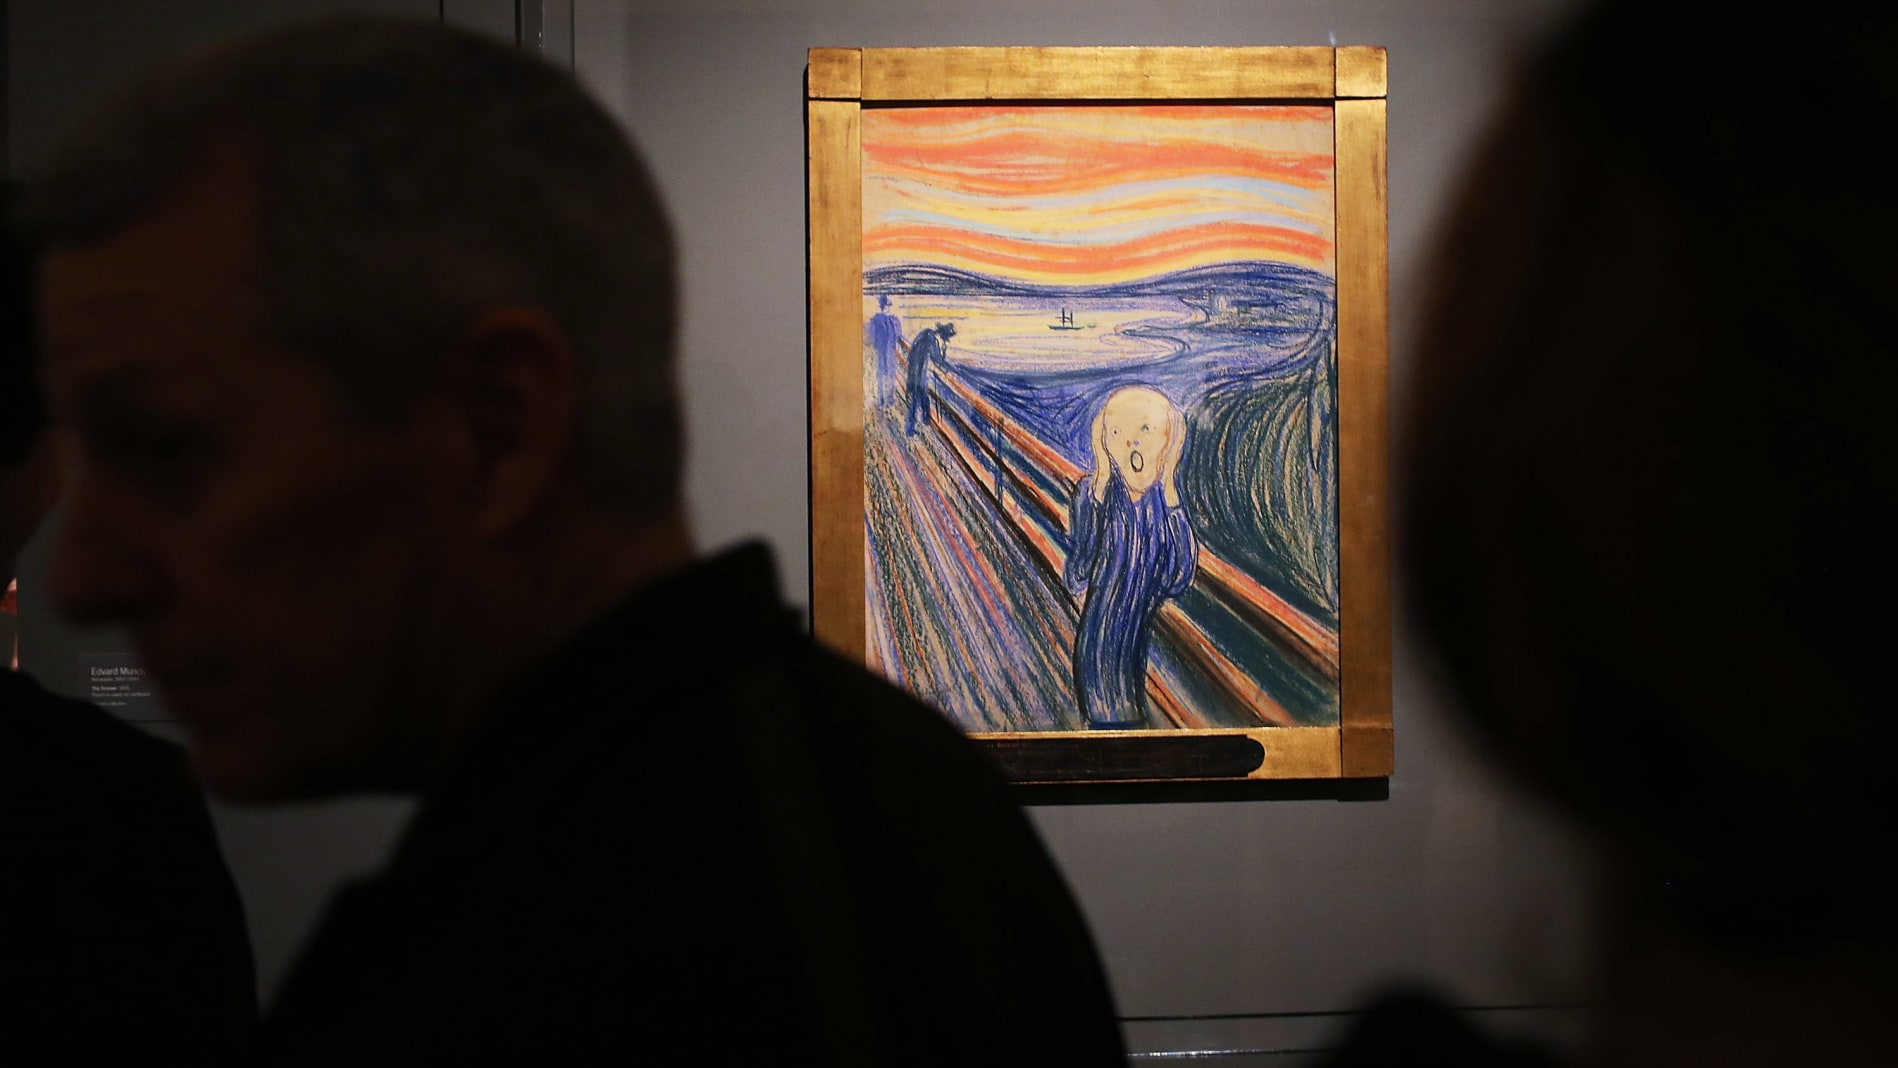 The Scream or Edvard Munch’s El Grito has an occult message